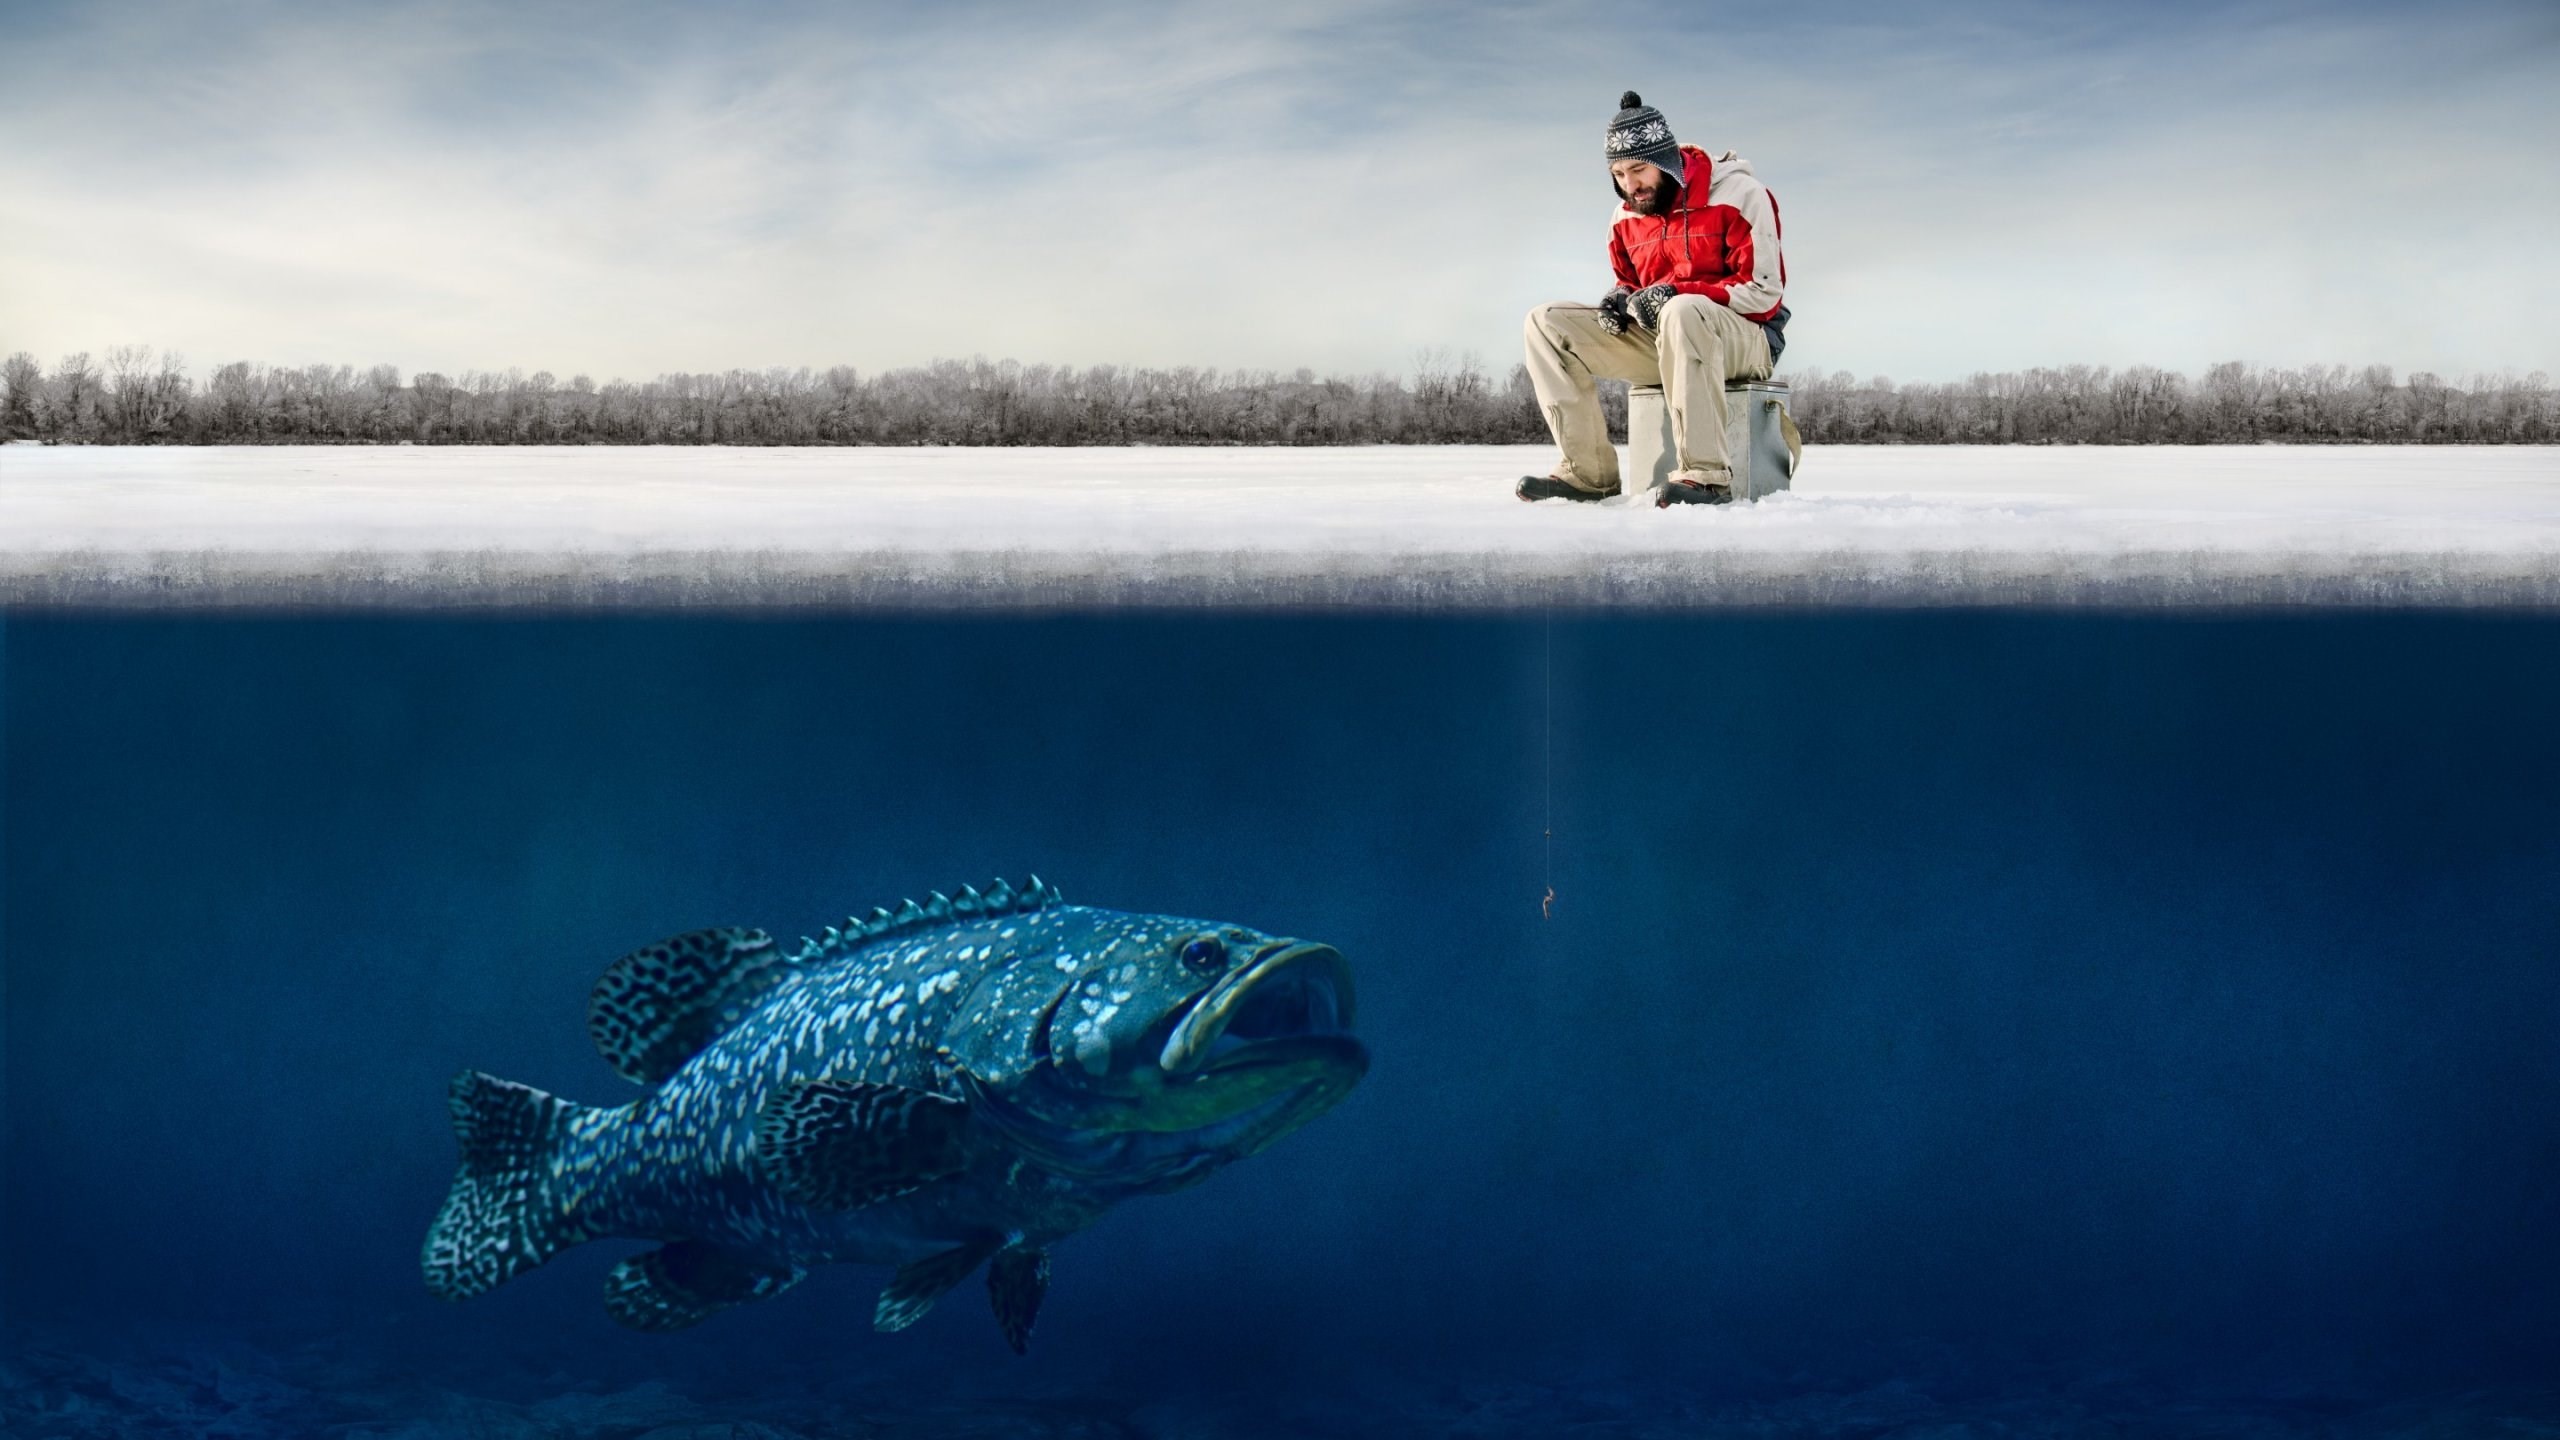 Wallpaper.wiki Funny Bass Fishing Image PIC WPC009900